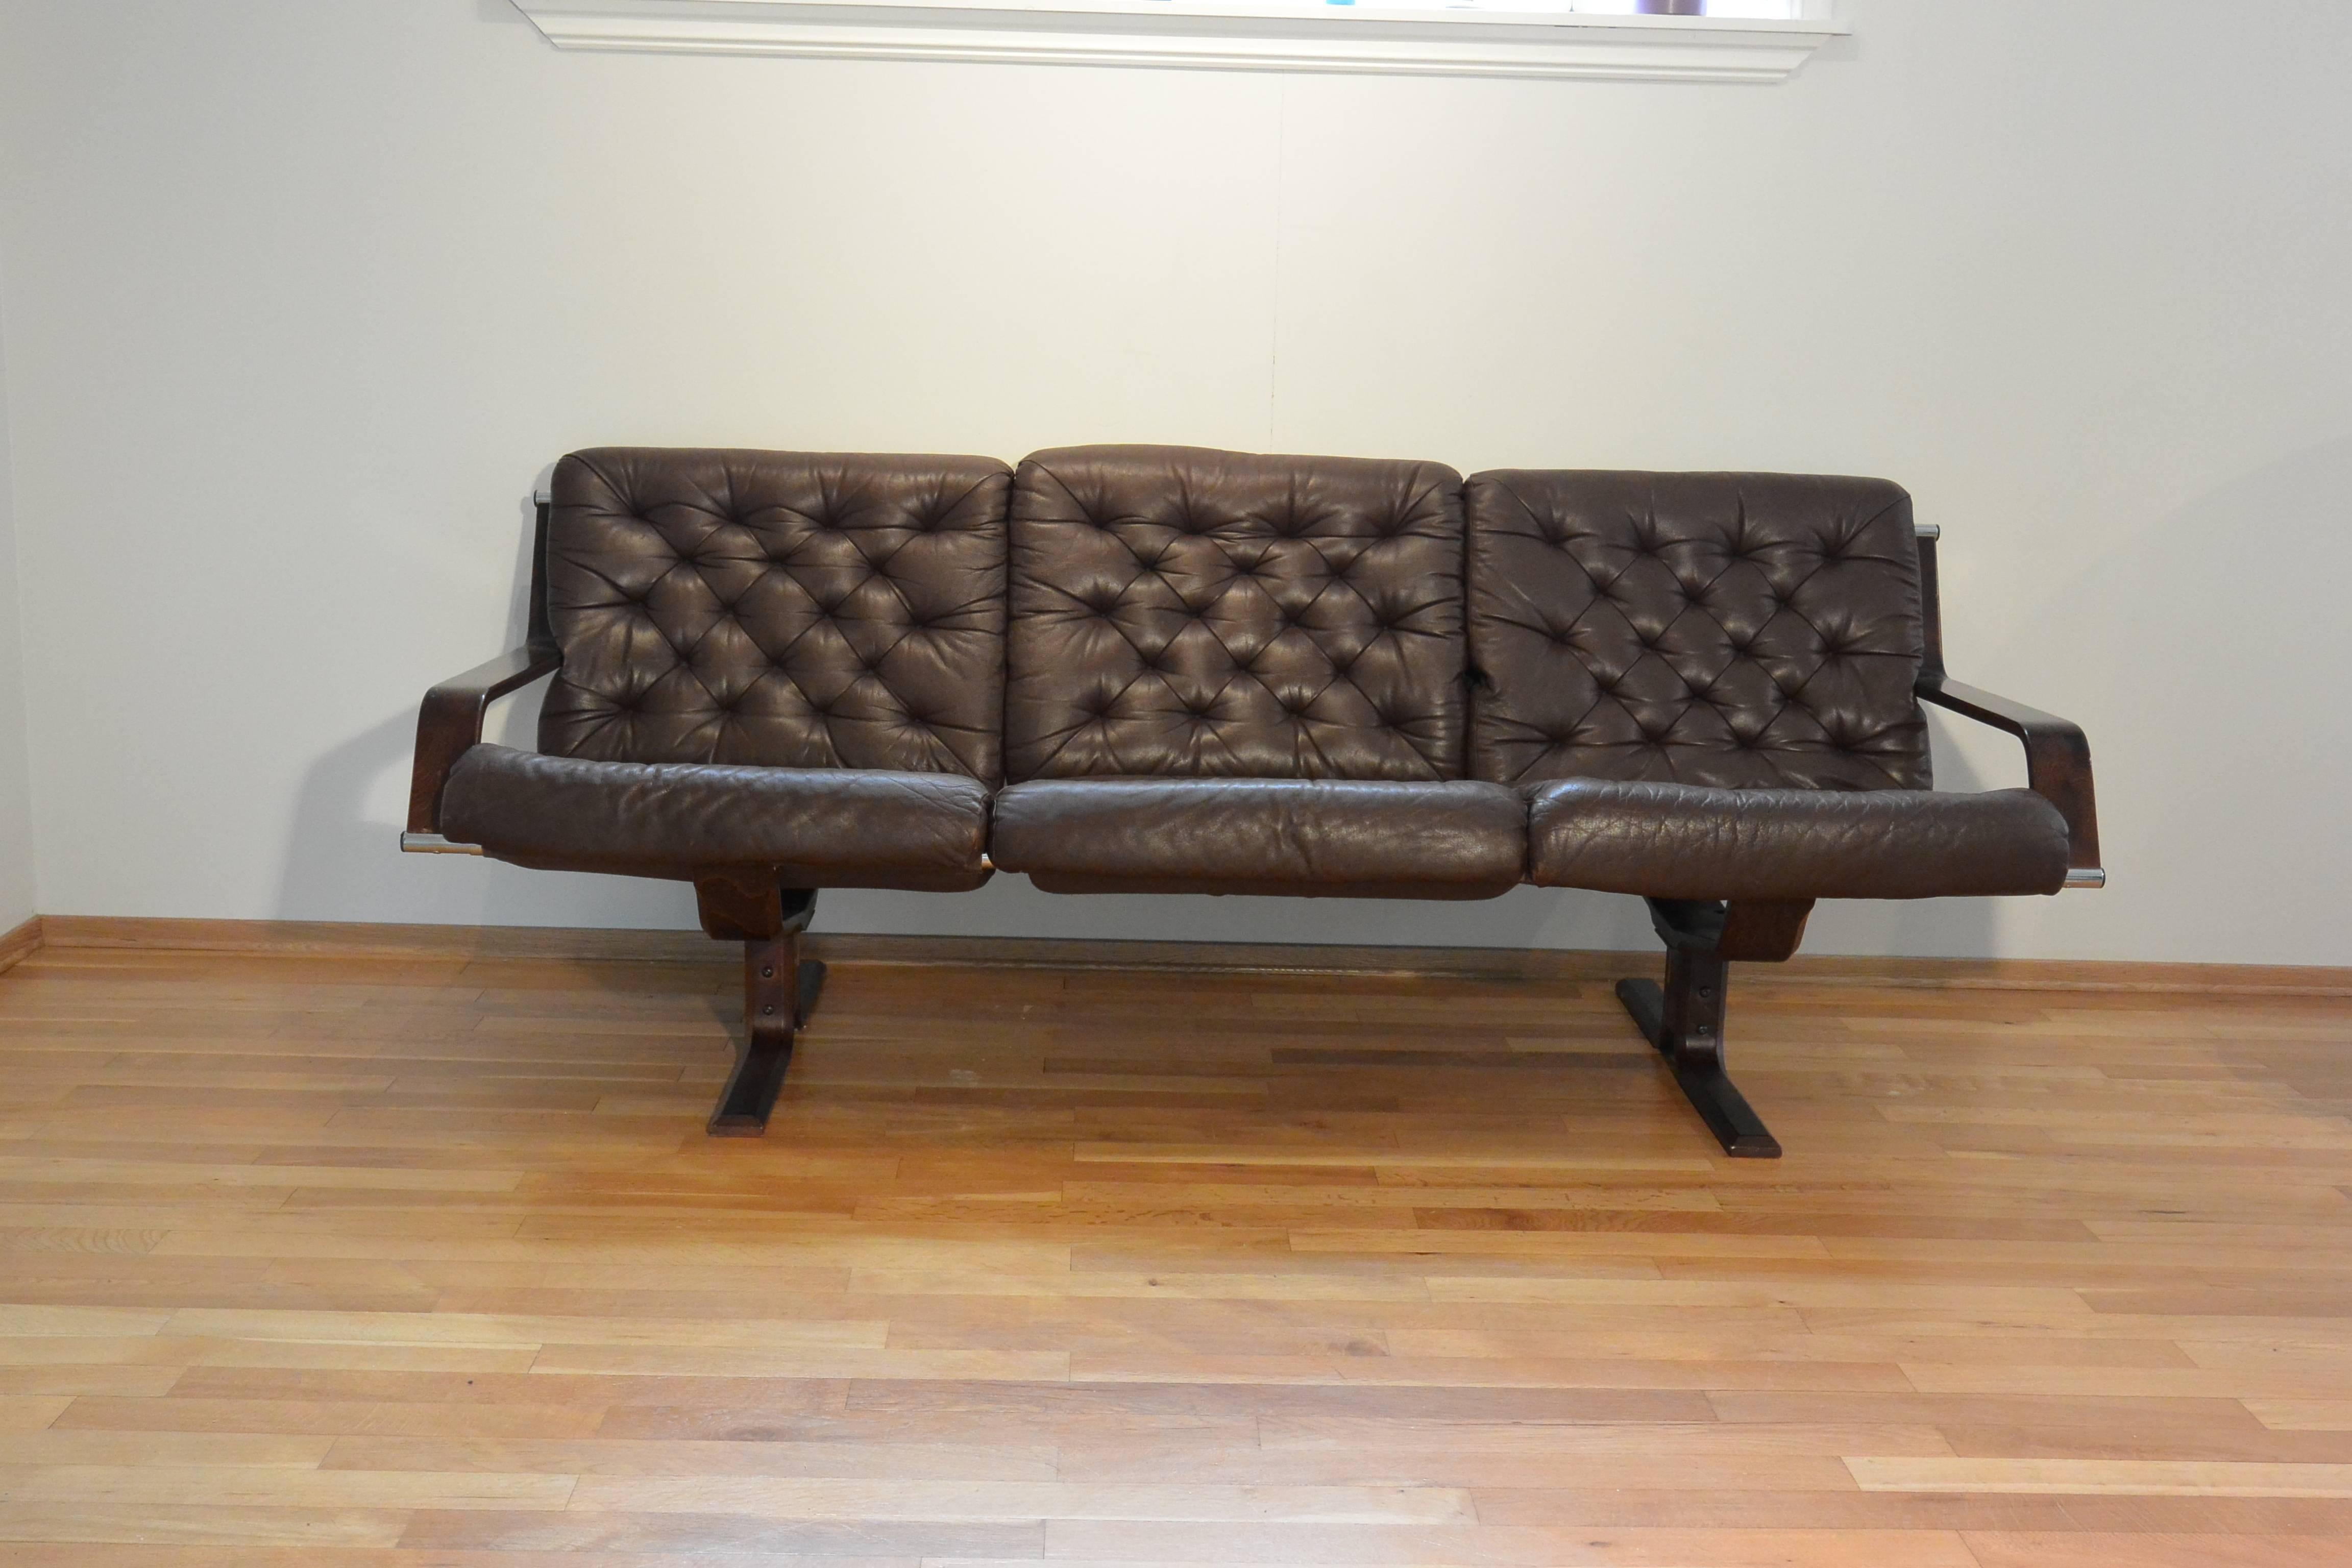 The Woodman Restman designed by Sigurd Ressell manufactured by Vatne Møbler, Norway. 

A rare gem confirmed from the Vatne catalogue, see image on photograpghs. Stunning design and a quality Norwegian build. This thick leather hide sofa on rare